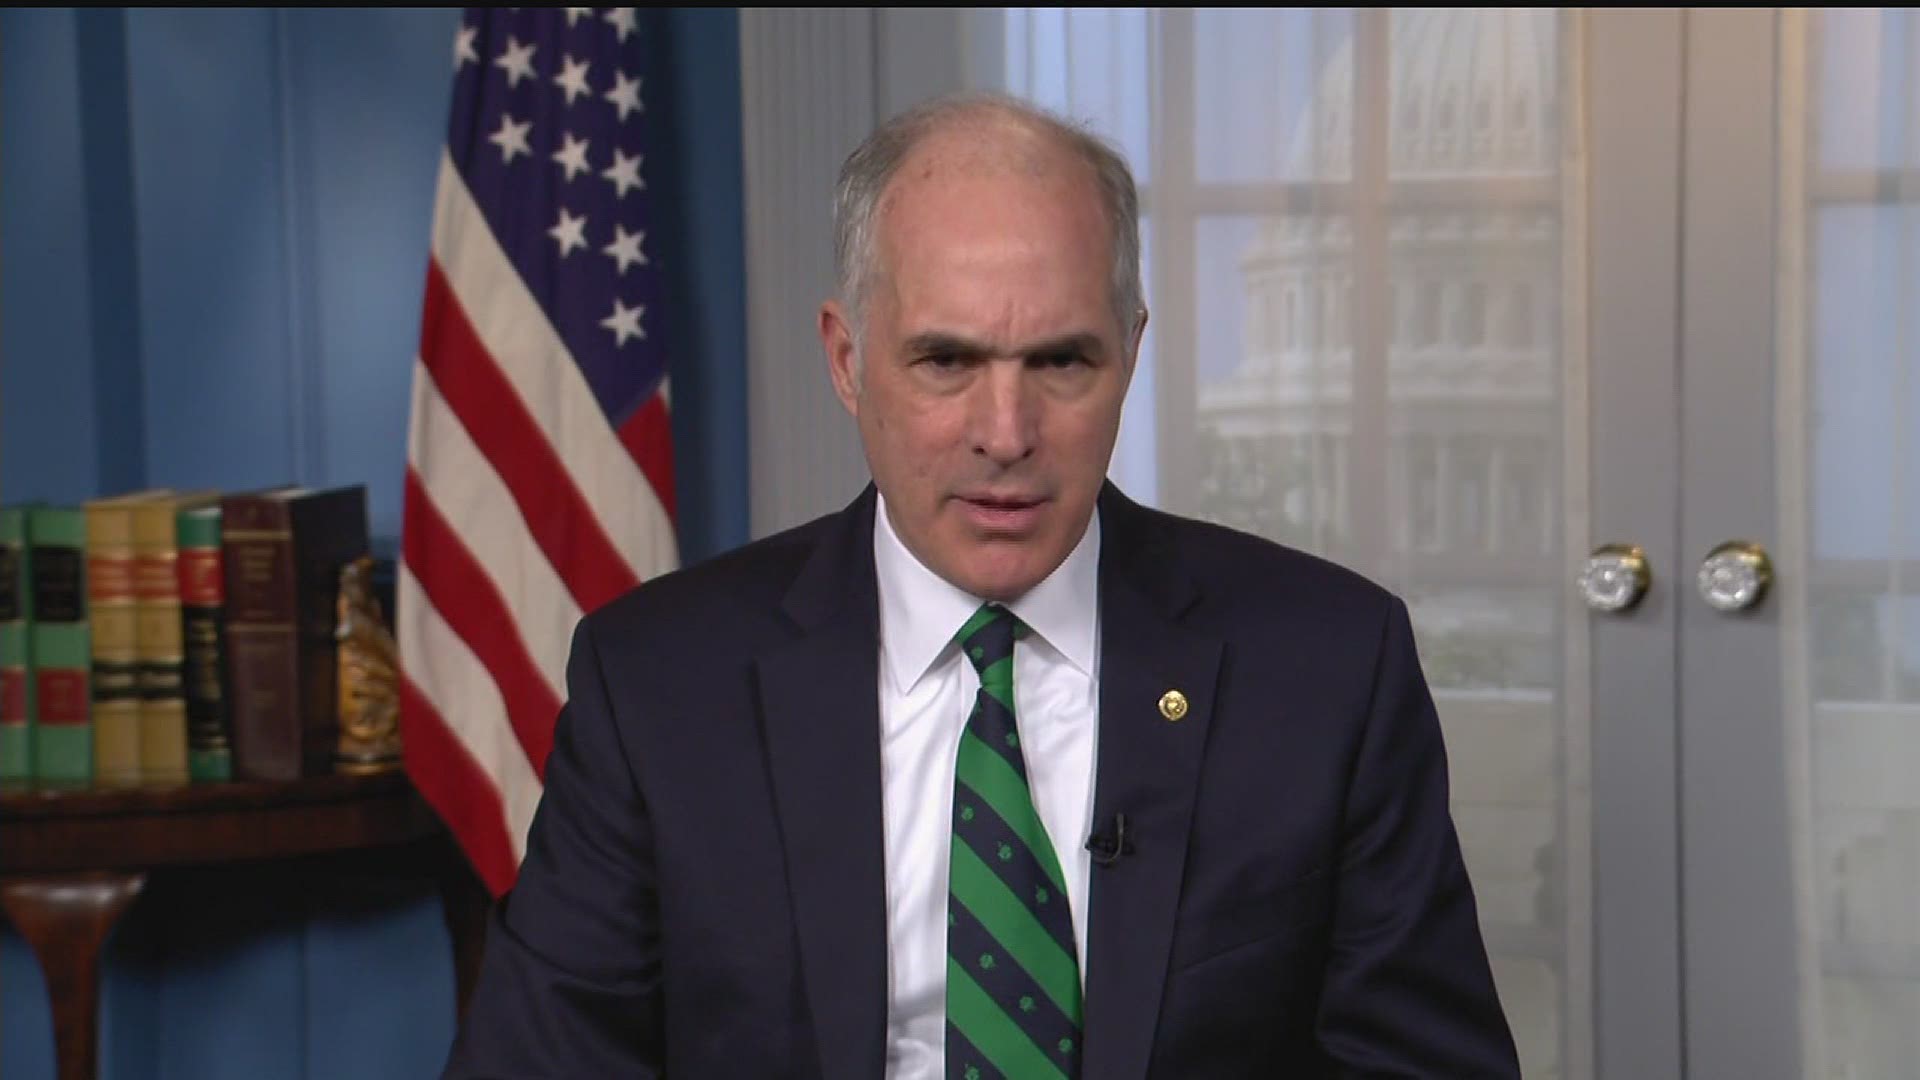 US Senators Bob Casey and Pat Toomey discuss what legislation they think Americans need now amid the COVID-19 pandemic